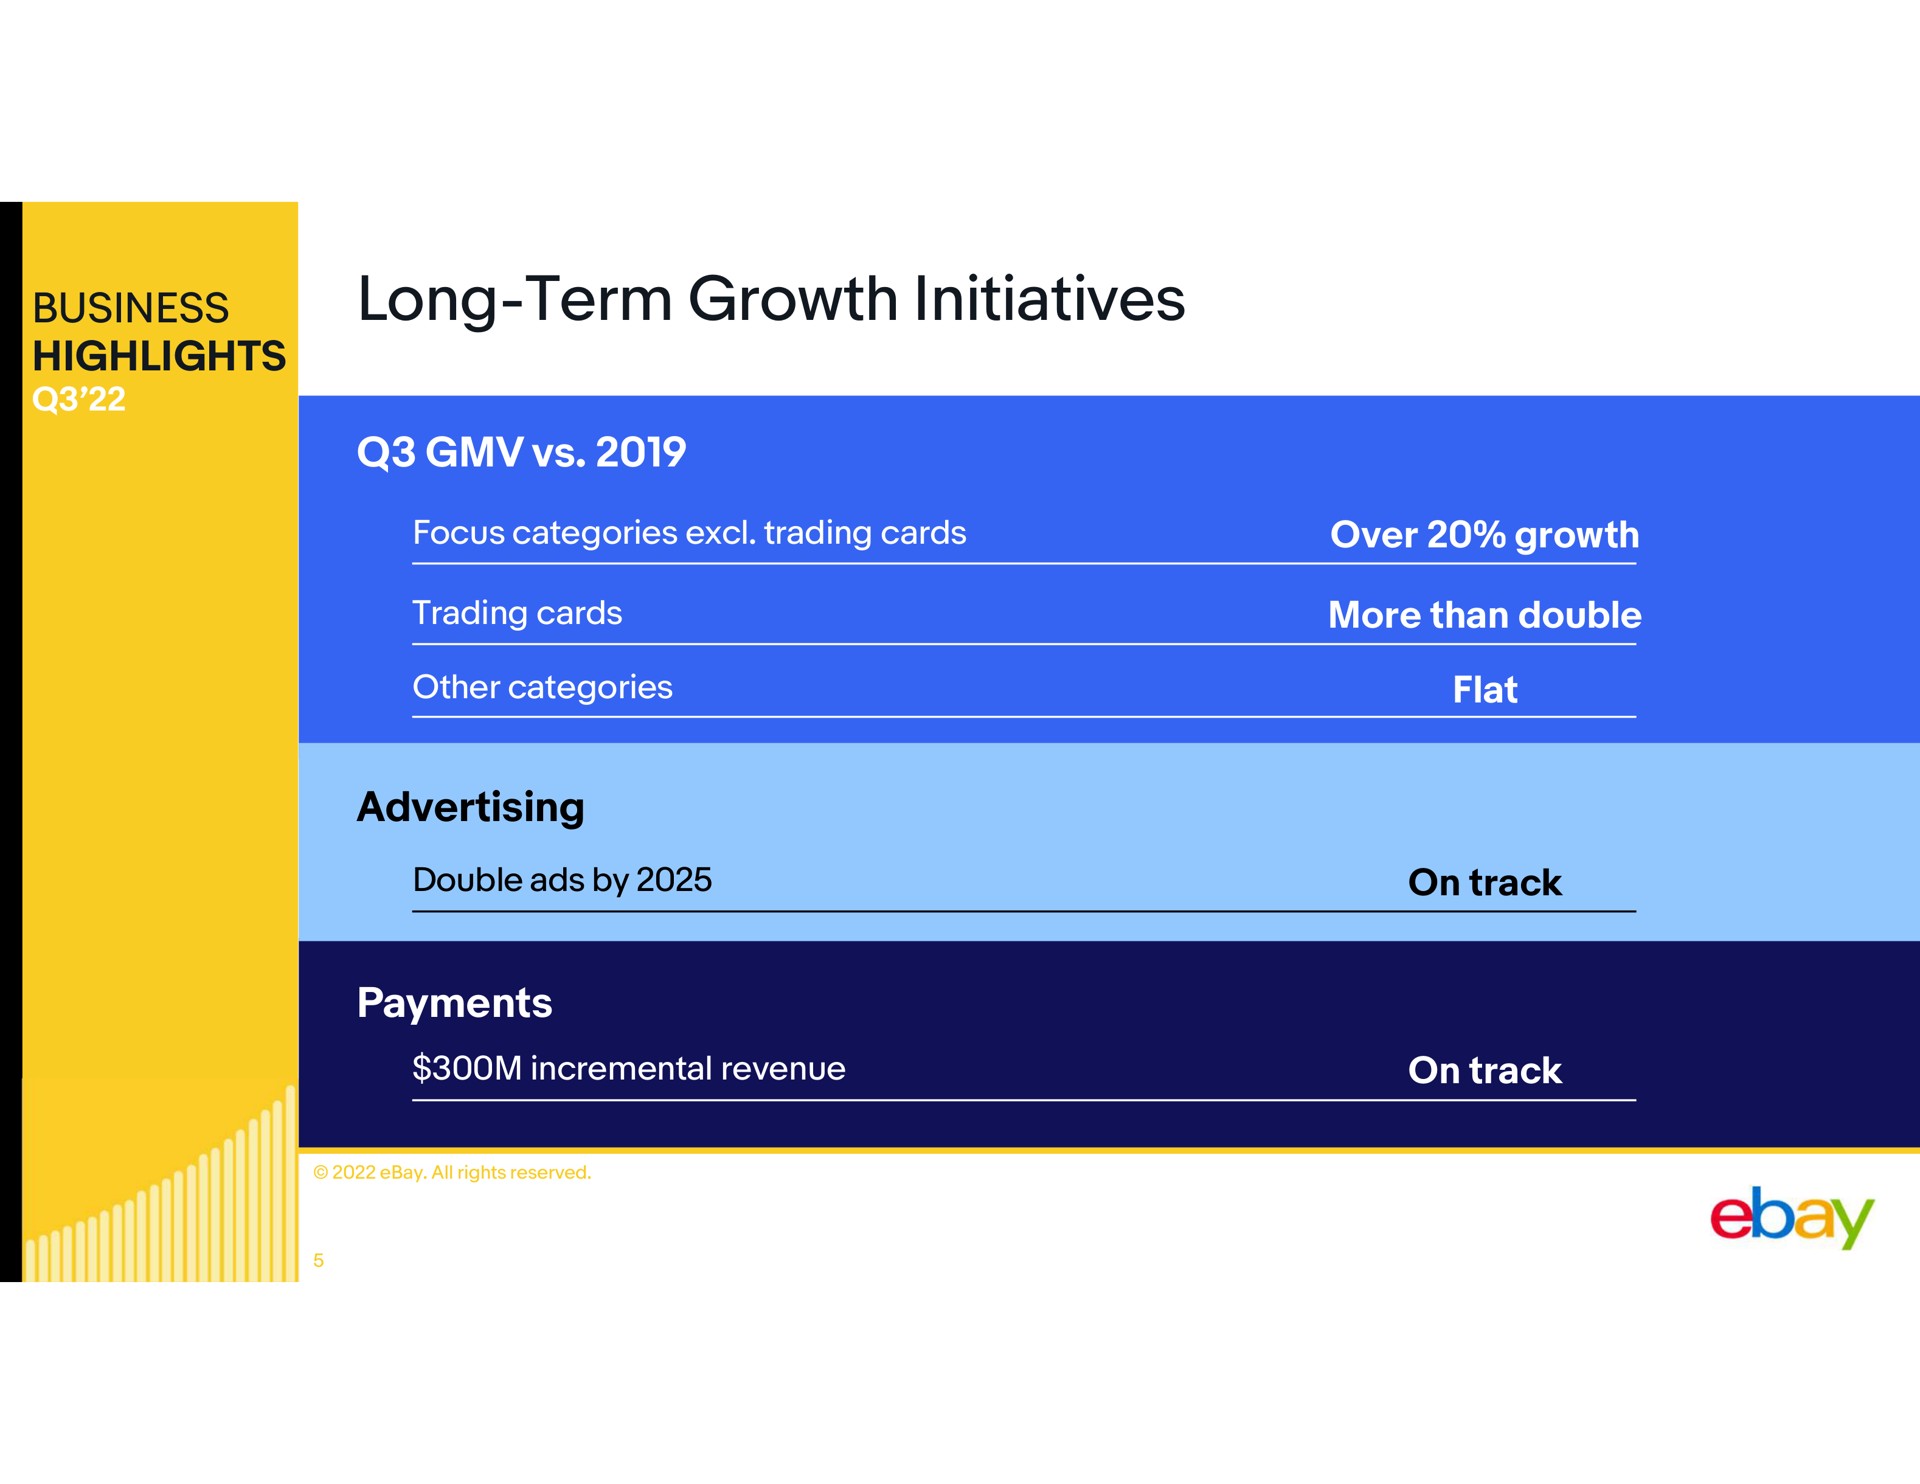 business highlights long term growth initiatives advertising payments over growth more than double flat on track on track | eBay